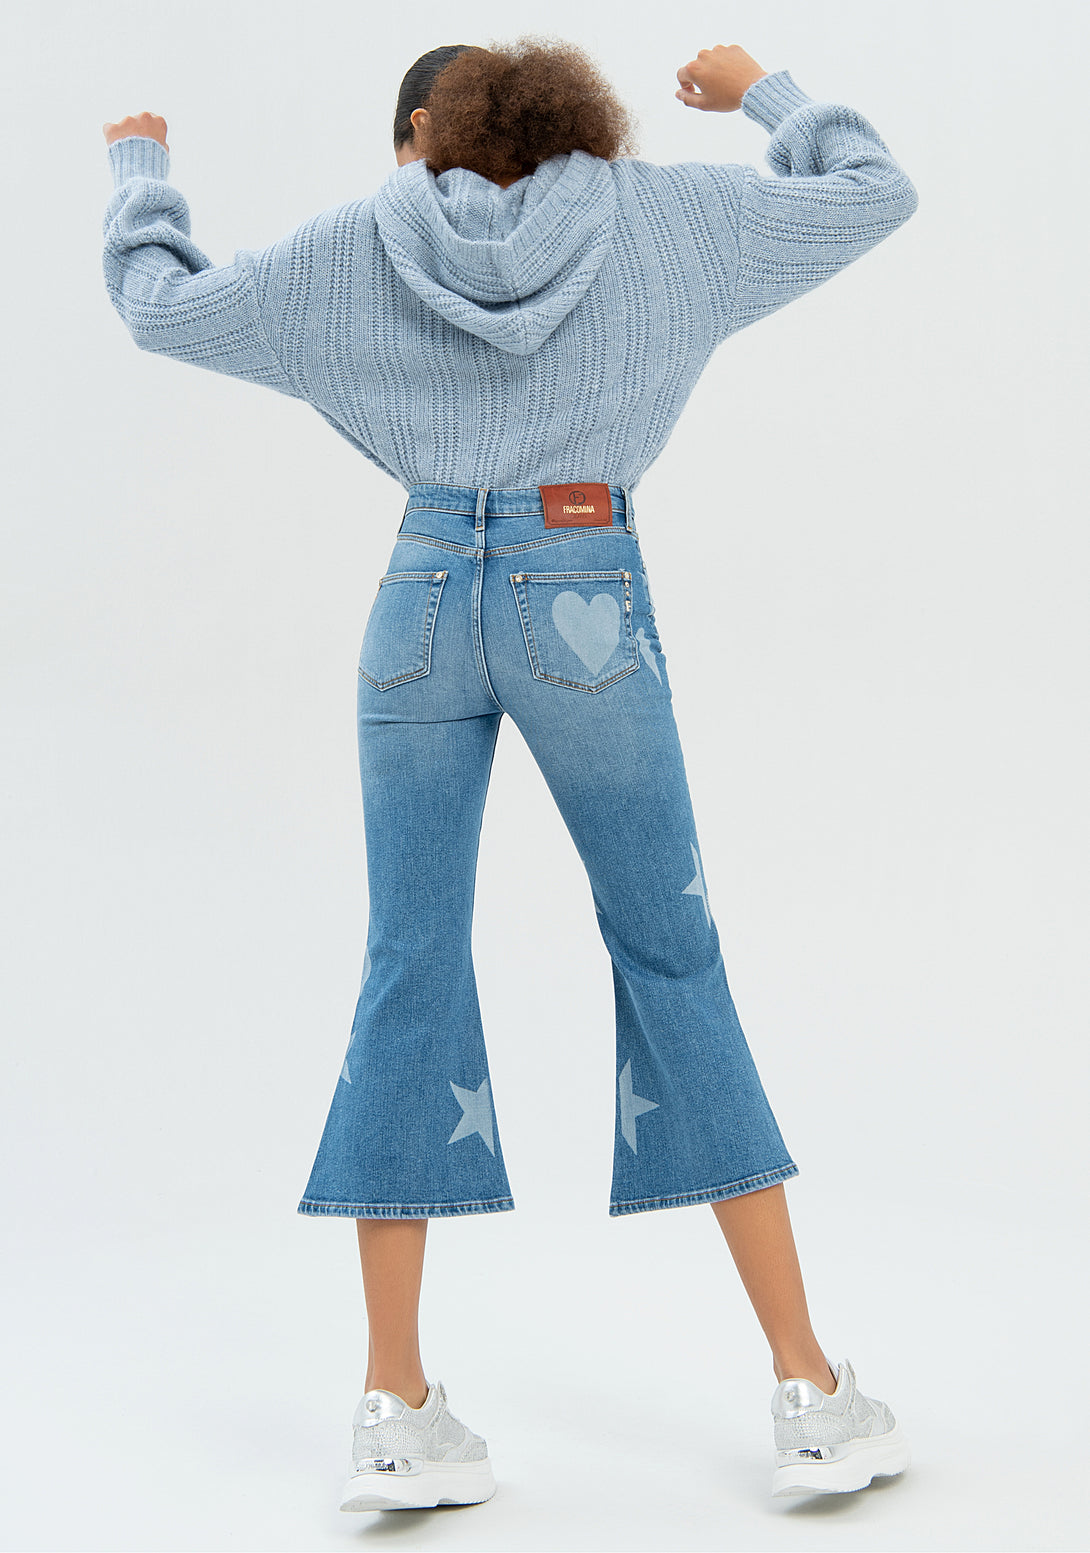 Jeans flare cropped made in denim with symbols pattern Fracomina FP22WV9006D41893-349-6